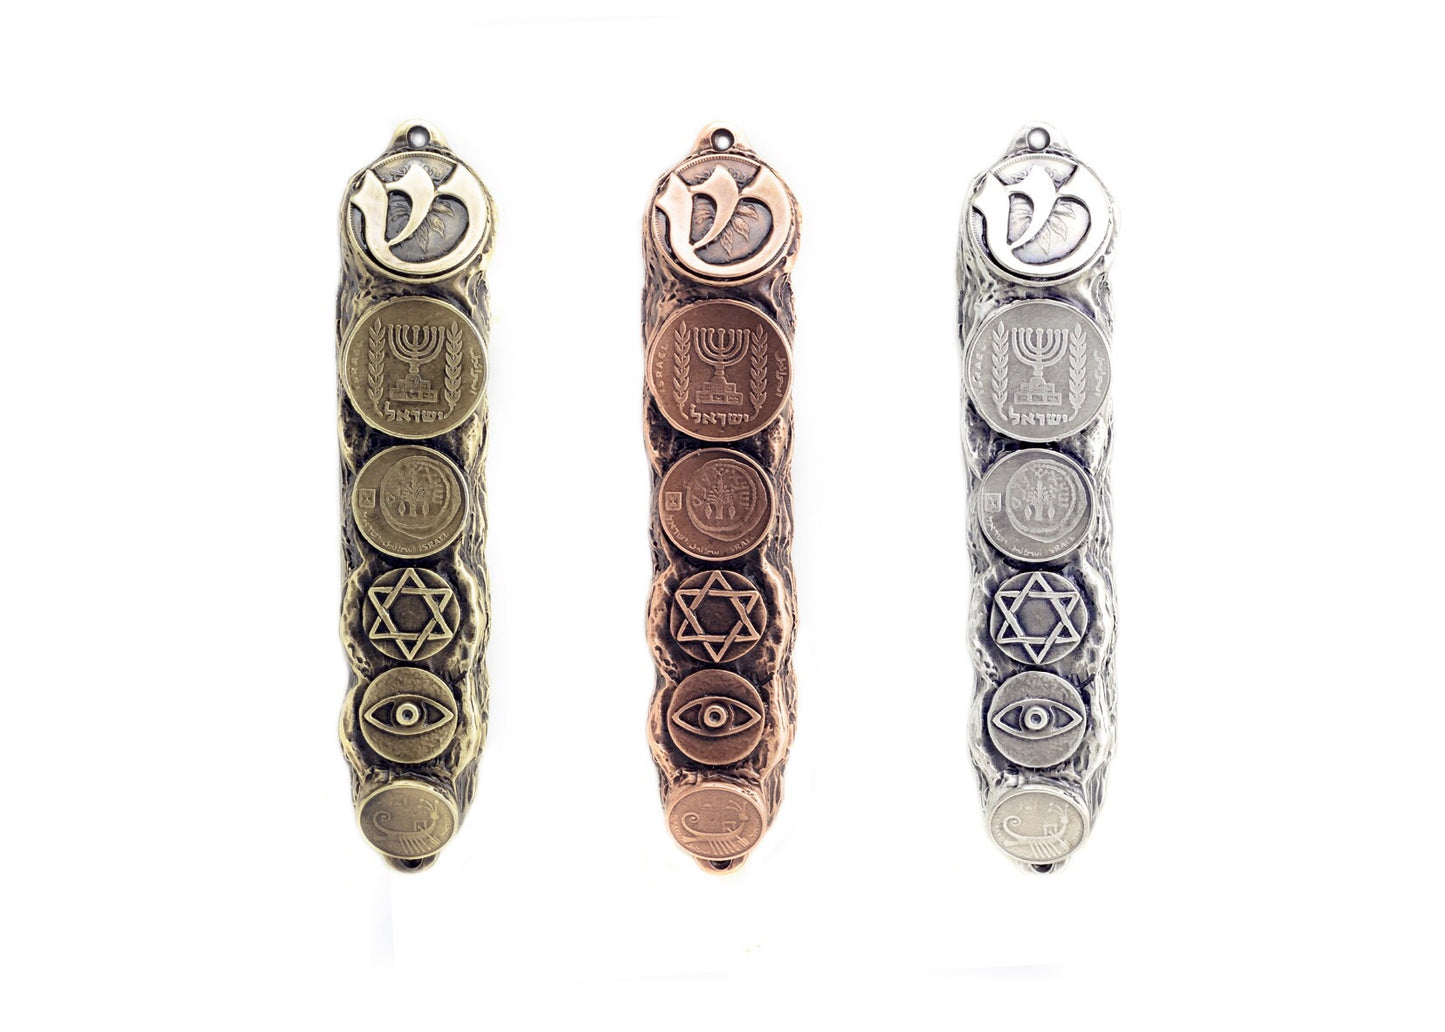 Silver Mezuzah Case, Sterling Silver Mezuzah with Scroll for Door, Ornate Mezuzah, Intricate Royal Mezzuzahs, Judaica Gifts for Home - Small (13cm)